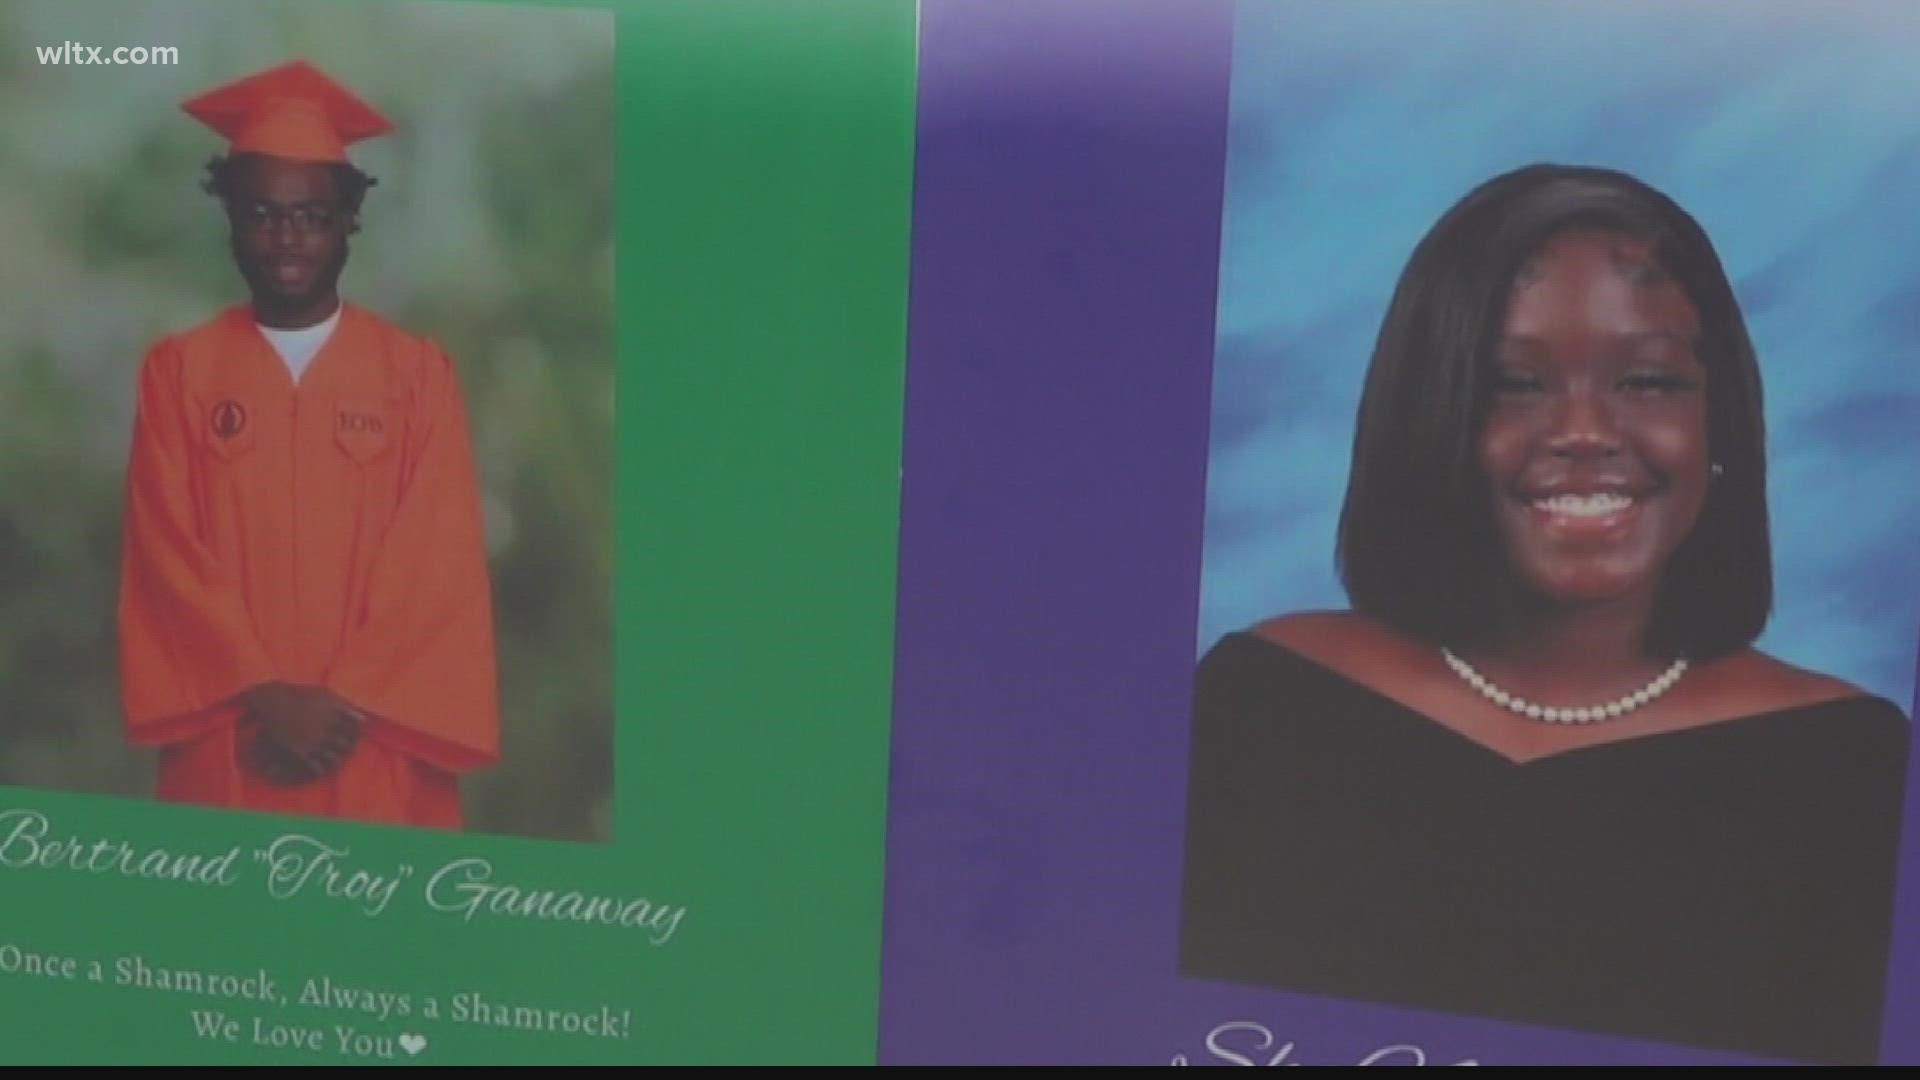 Today Eau Claire High School seniors graduated.
But this was also a chance to remember and honor two classmates who were lost to violence.